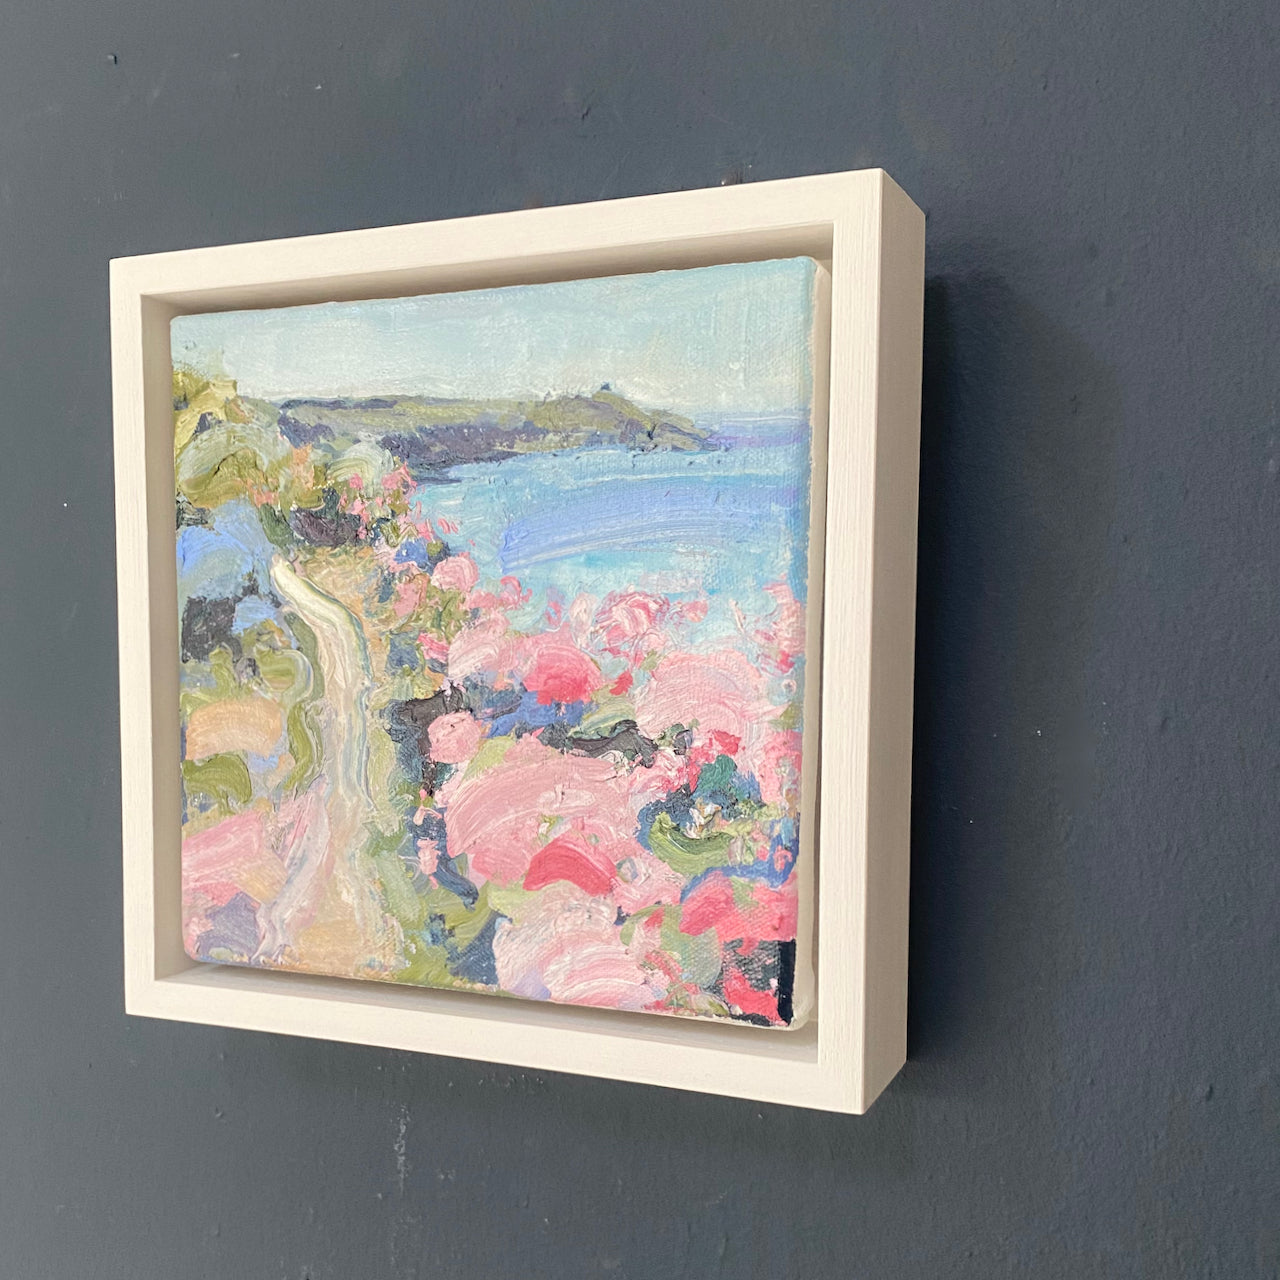 a framed Jill Hudson oli painting of Rame Head in south east cornwall, the headland is dark green with a pale blue and purple sea and the coast path  features pink, white and blue wildflowers.